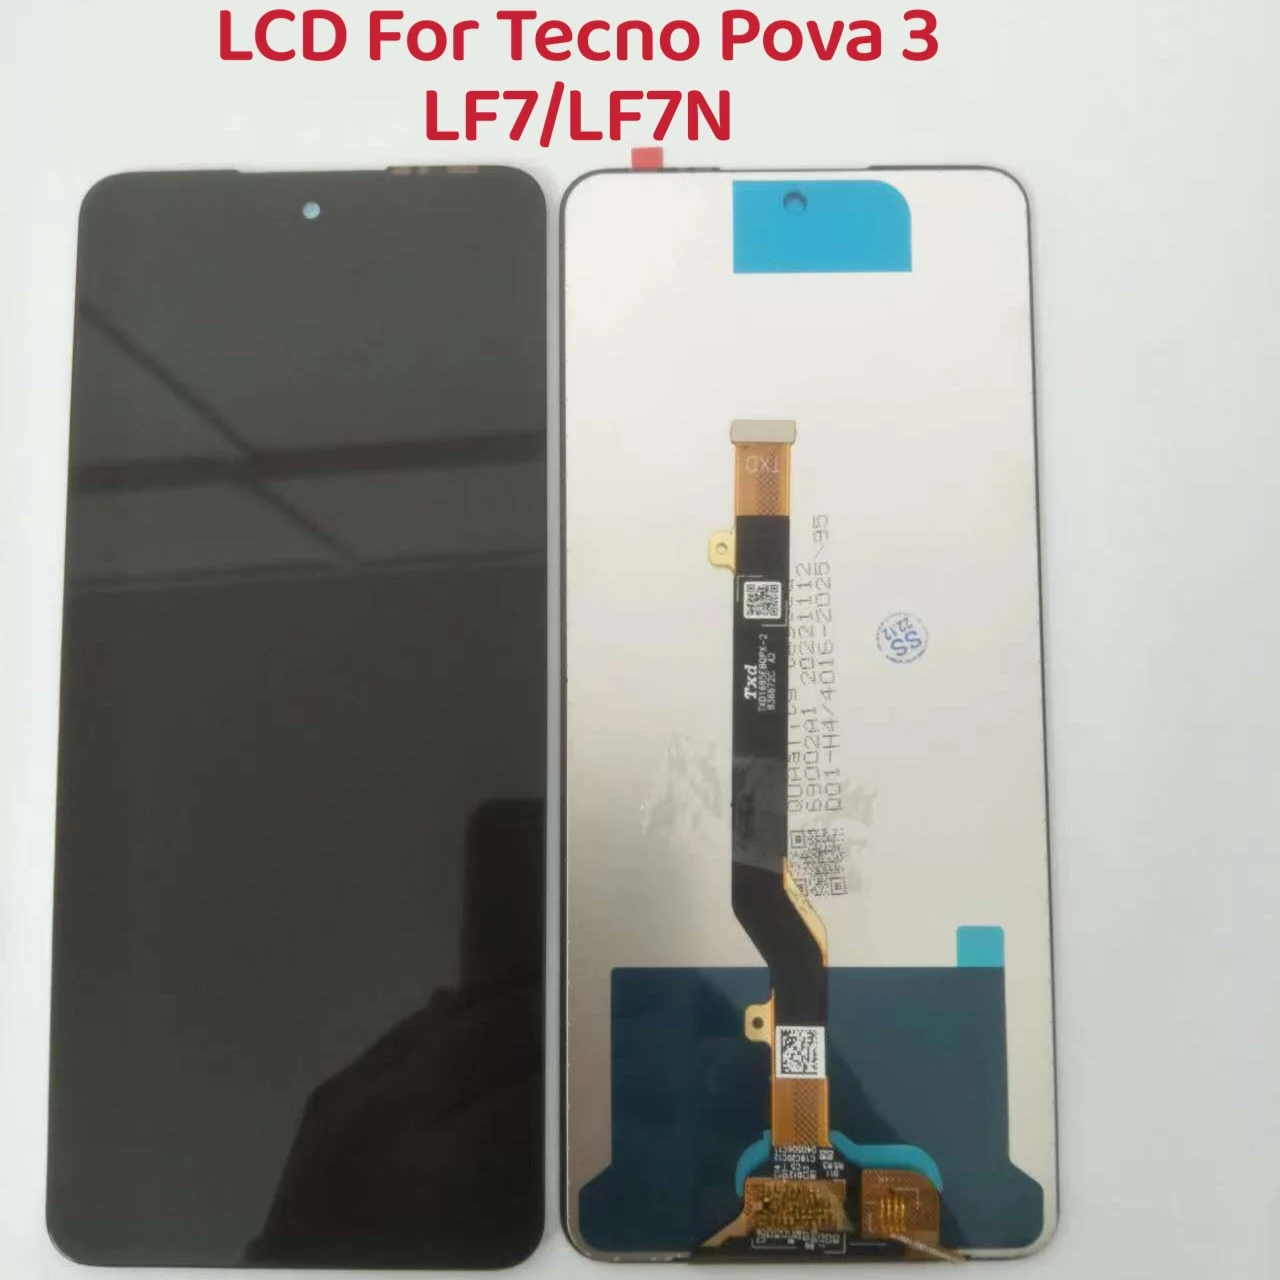 

10 PCS/Lot Original Display For Tecno Pova 3 LF7n LCD With Sensor Touch Panel Screen Assembly Fix For Tecno Pova 3 LF7n LCD